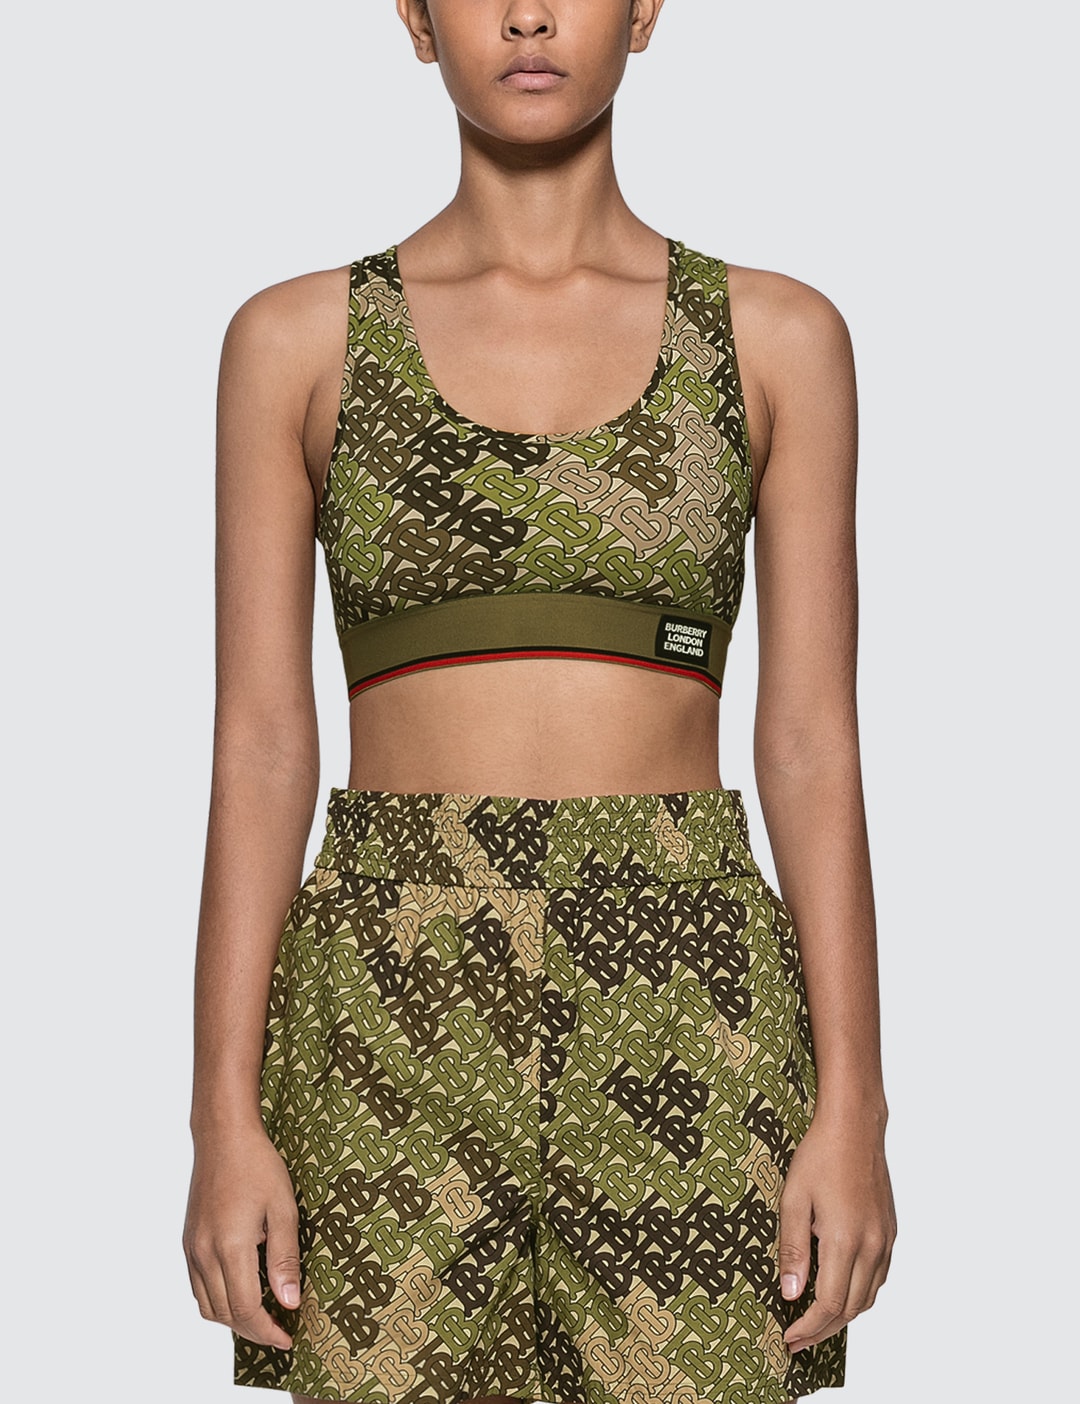 Burberry - Monogram Print Stretch Jersey Bra Top | HBX - Globally Curated  Fashion and Lifestyle by Hypebeast